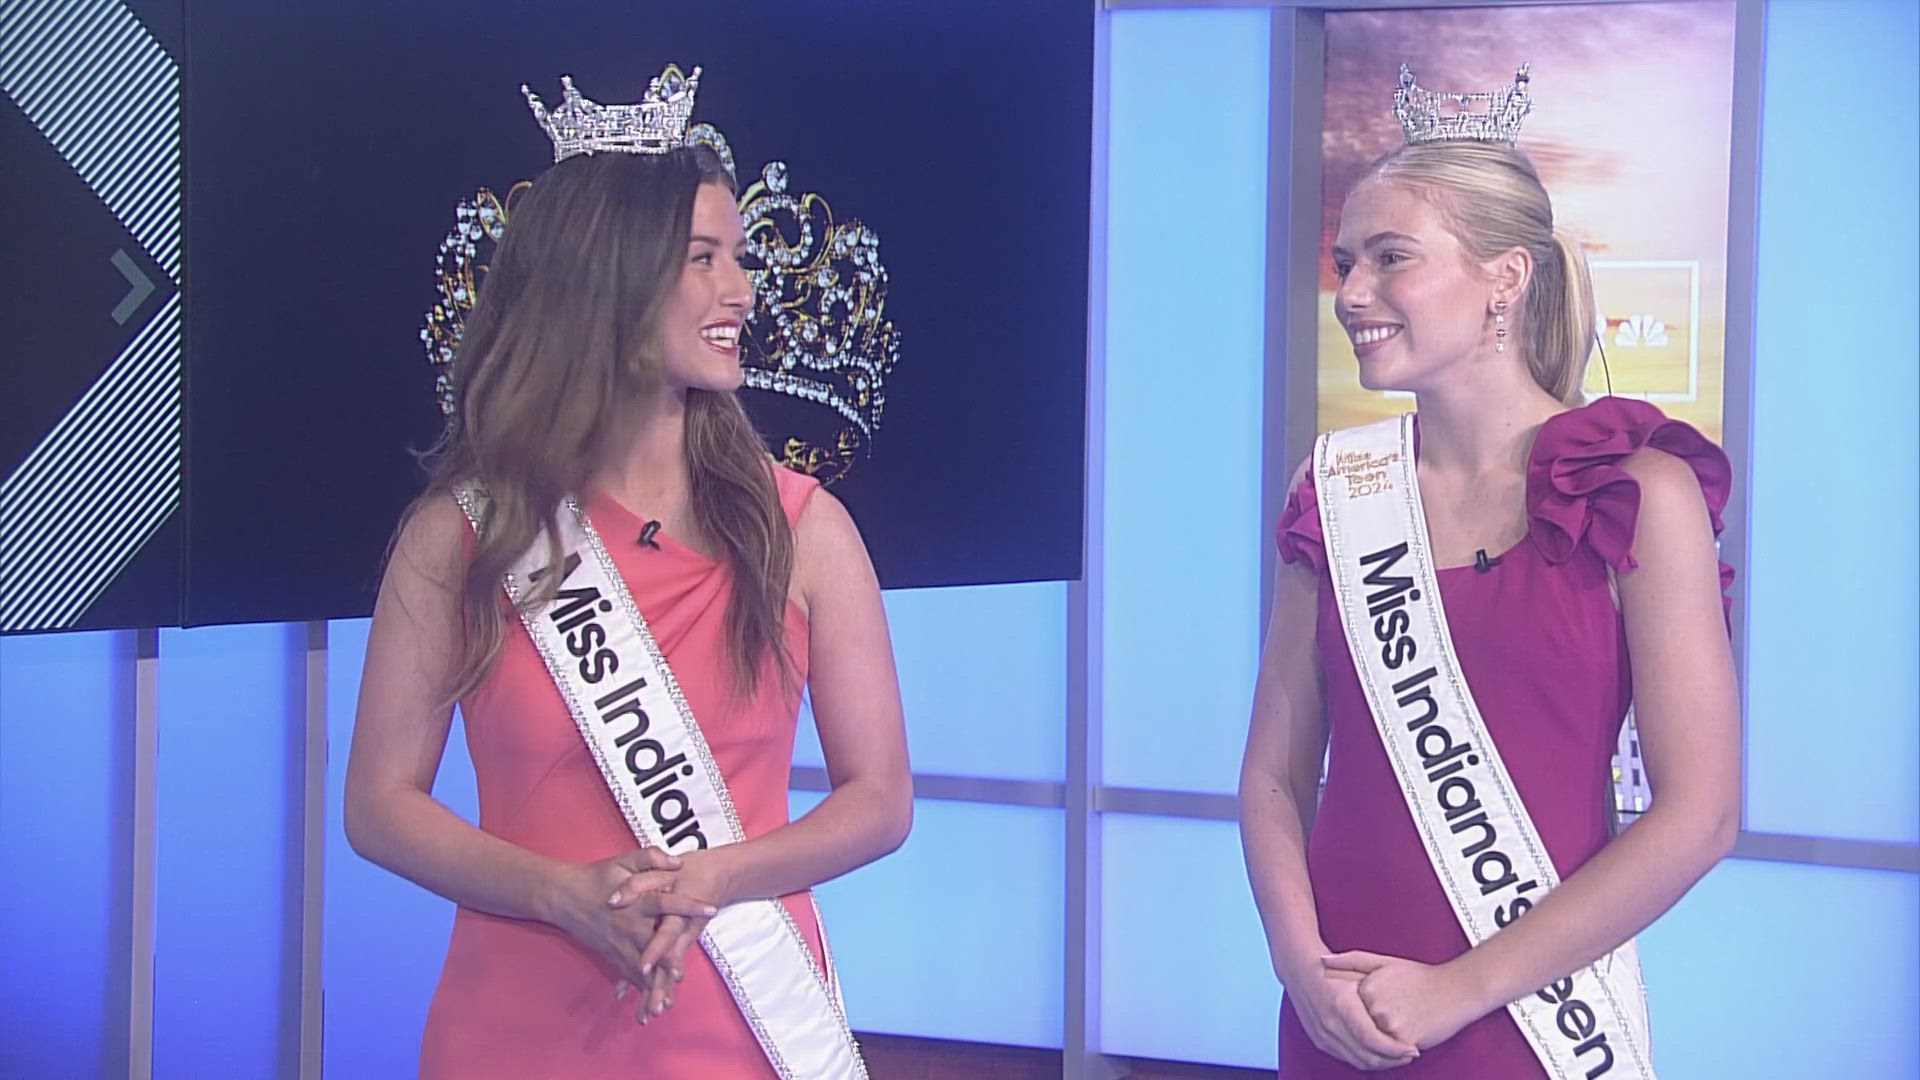 Both women will be competing in Miss America and Miss America's Outstanding Teen later this year.